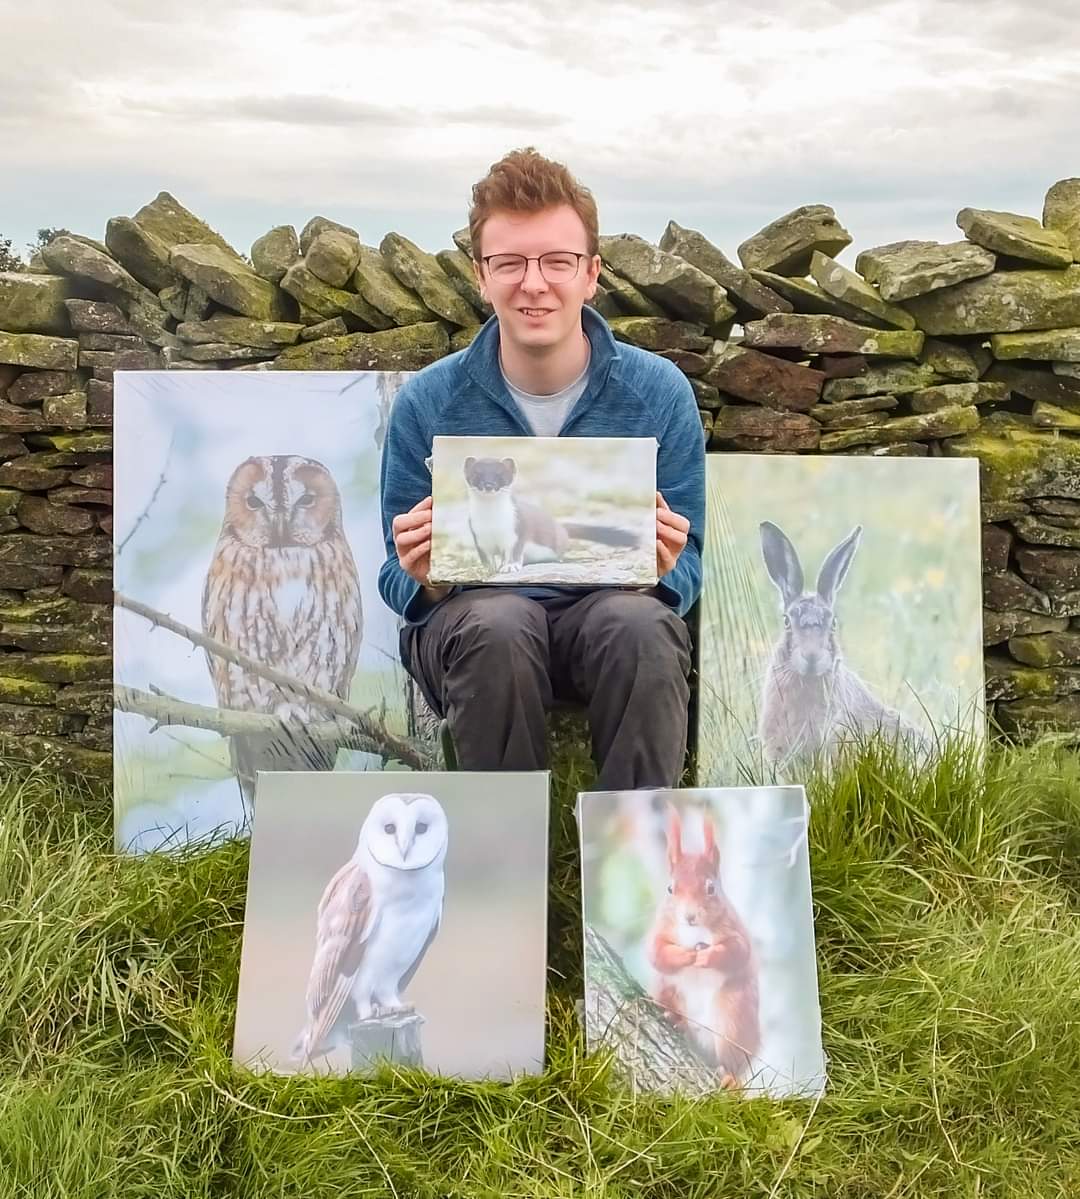 Coming soon to Bowlees Visitor Centre - my first wildlife photography exhibition! Throughout this April, a selection of my best work will be on display in the upstairs gallery - with the theme centered around birds in the North Pennines.